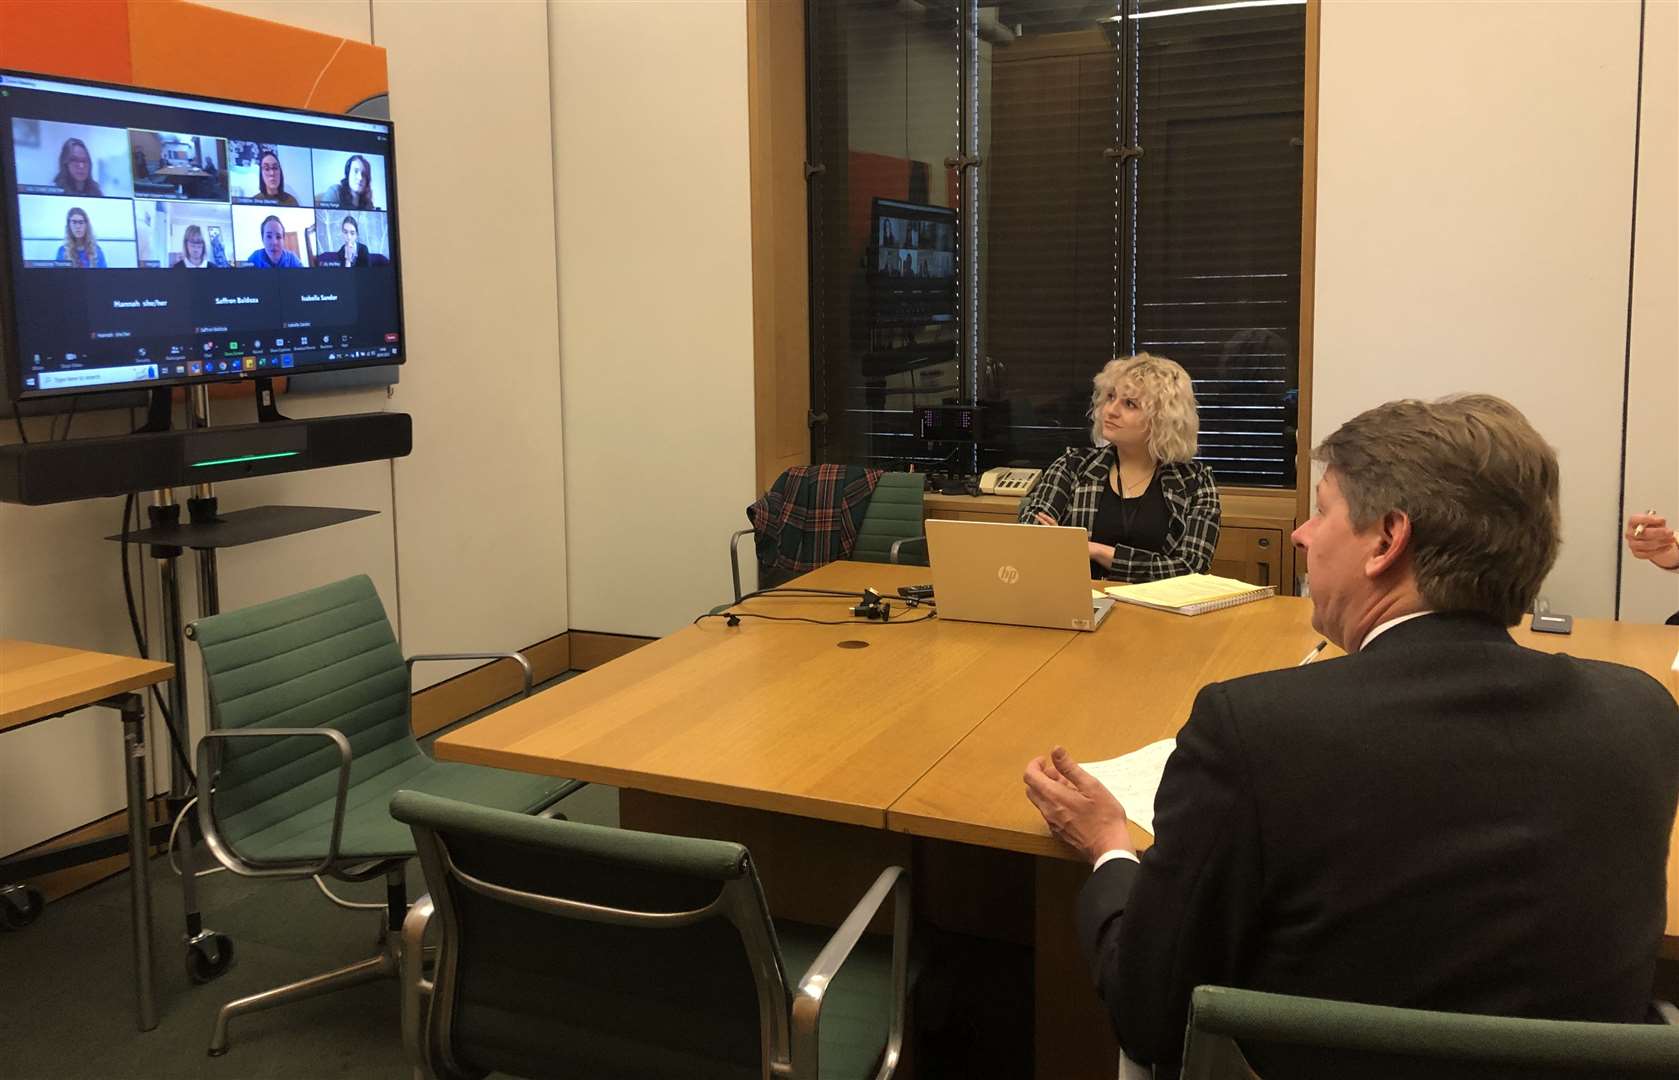 MP Robin Walker spoke to Megan and other members of the charity about SEND funding and autism awareness in schools. Picture: Ambitious about Autism